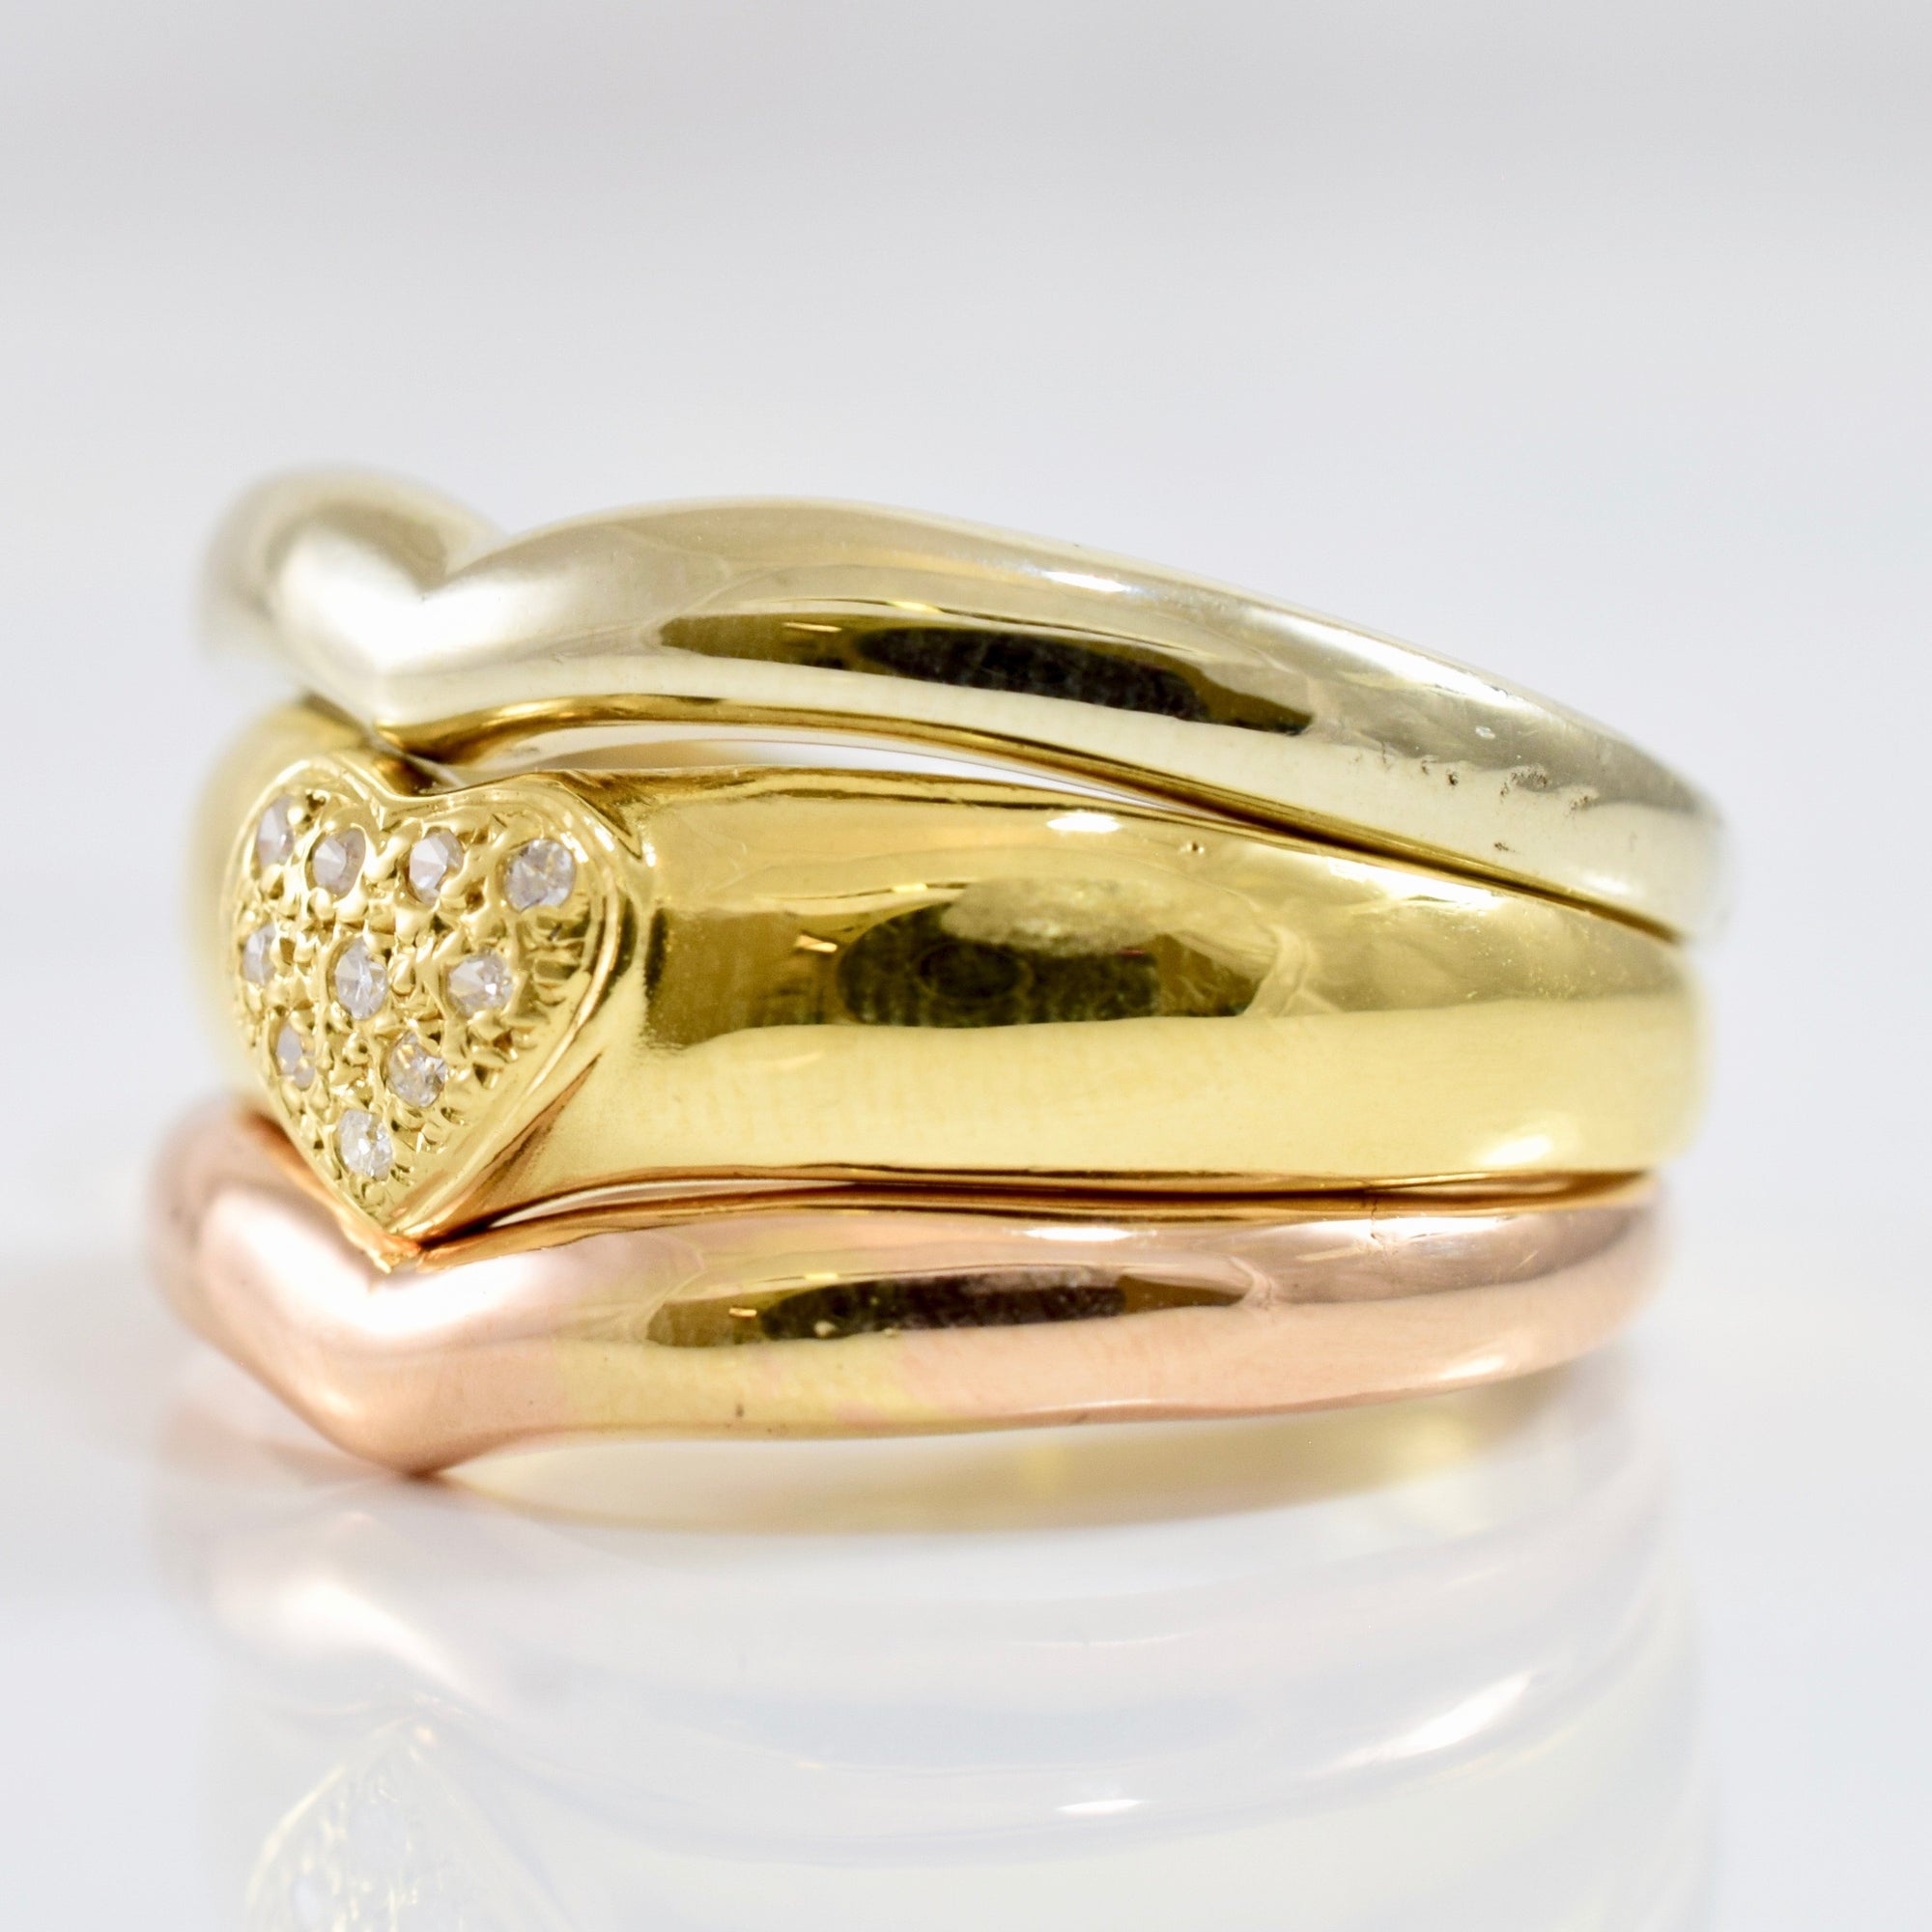 Tri Gold Stackable Rings | 0.02 ctw SZ 8 |